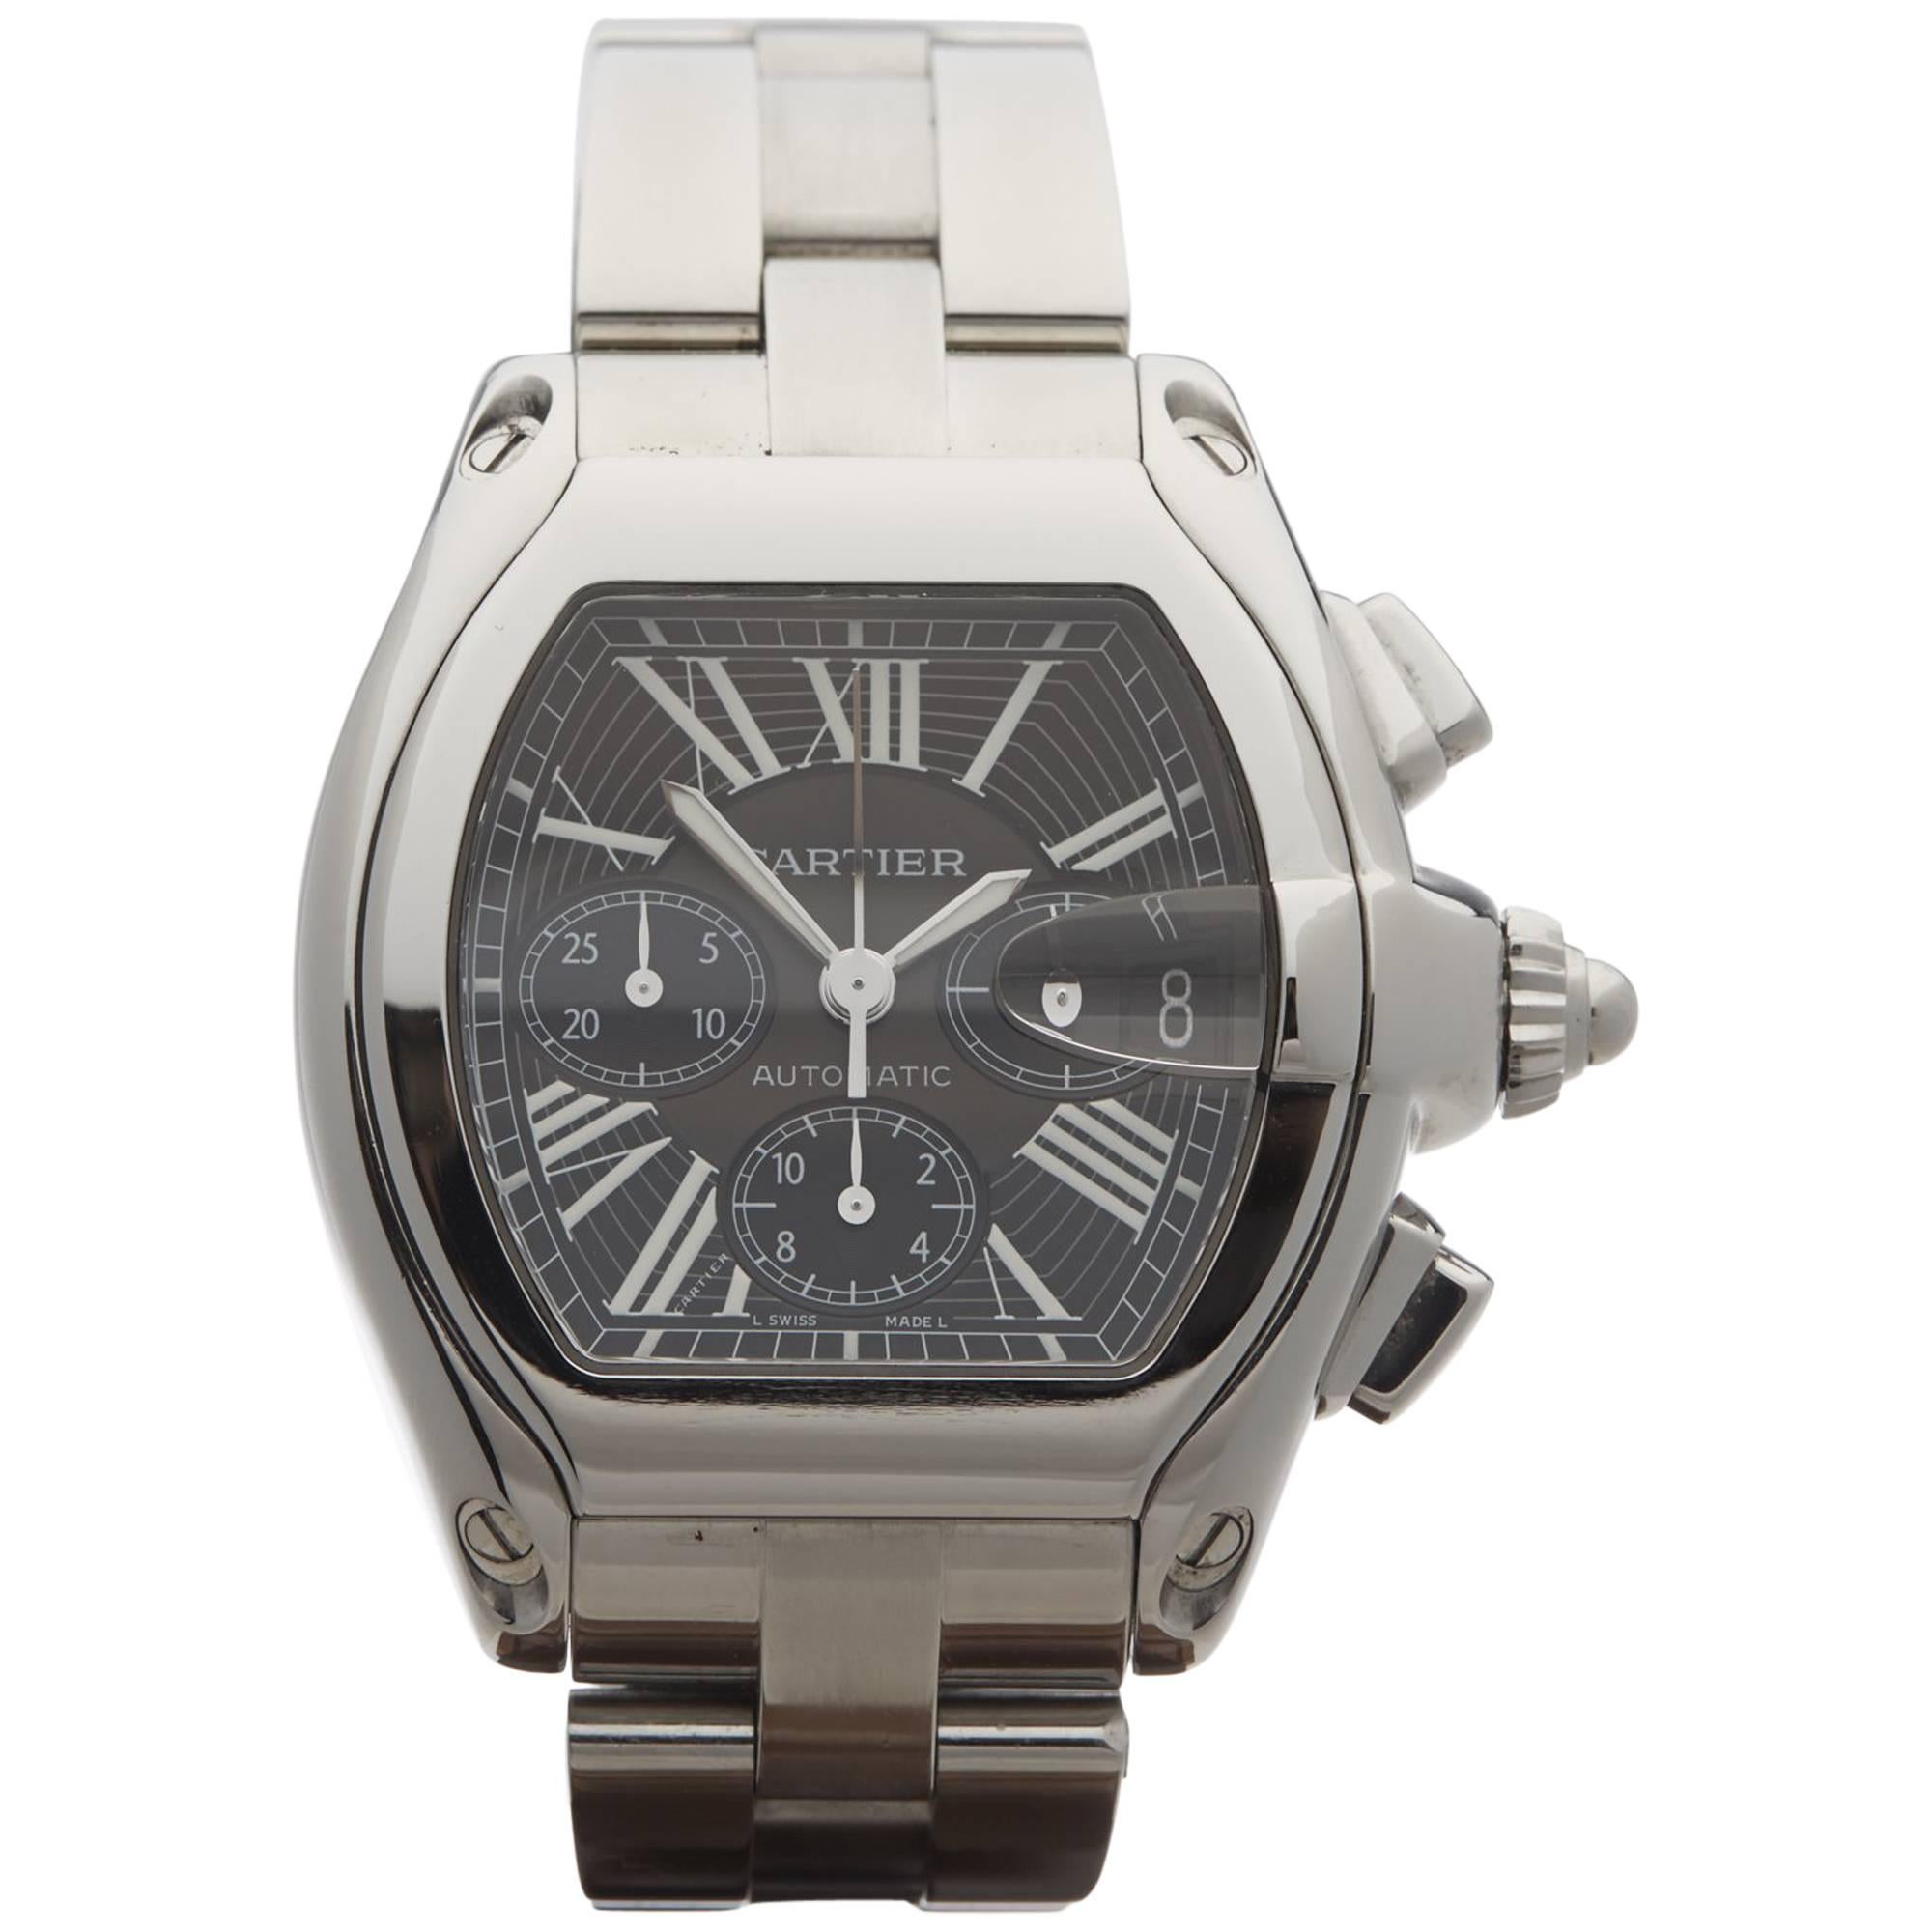  Cartier Stainless Steel Roadster Chronograph Automatic Wristwatch 2000s